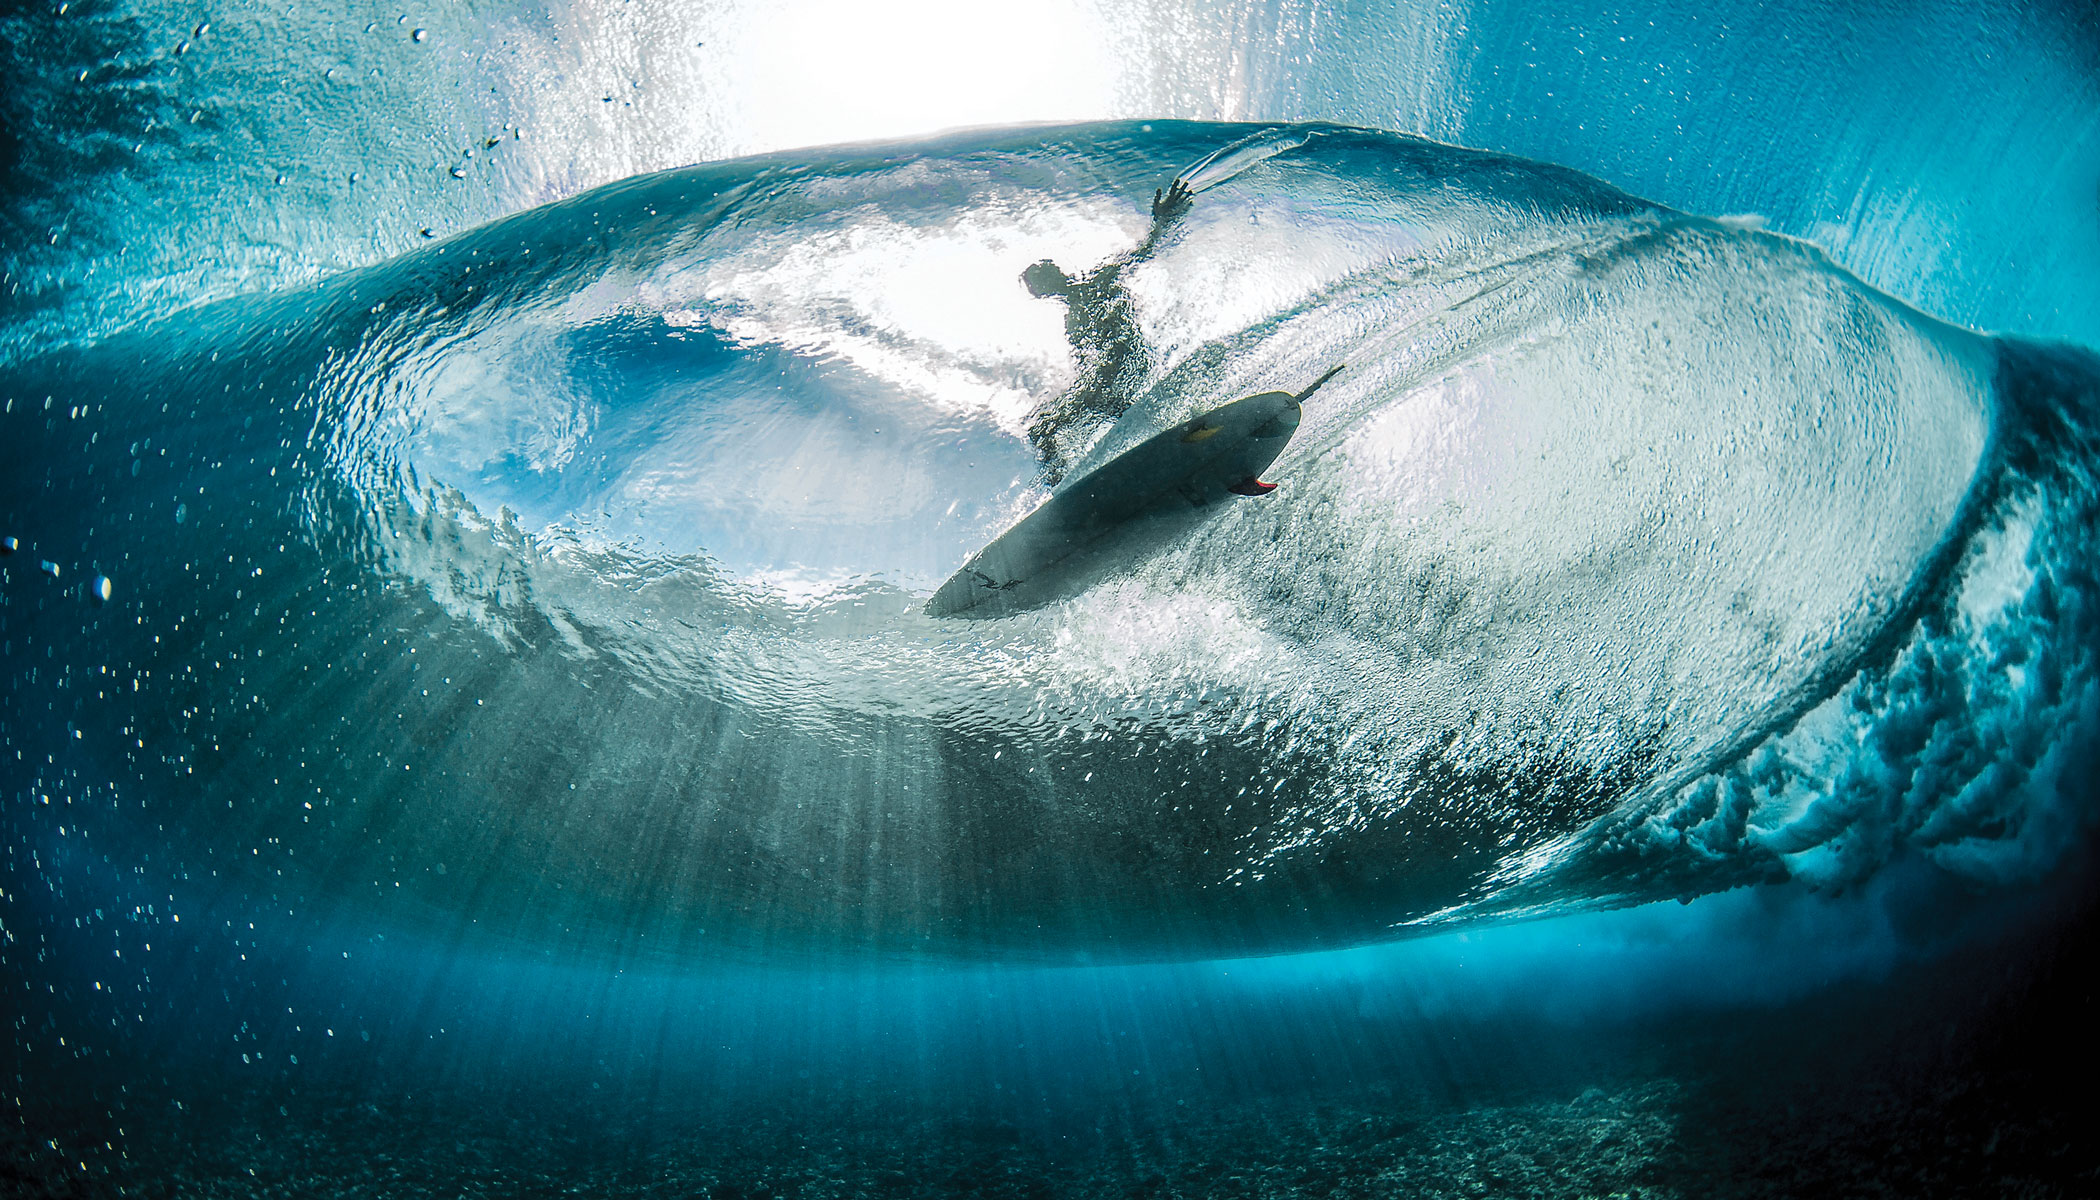 Whalebone Photo Contest 2022: Judge’s Interview with Ben Thouard